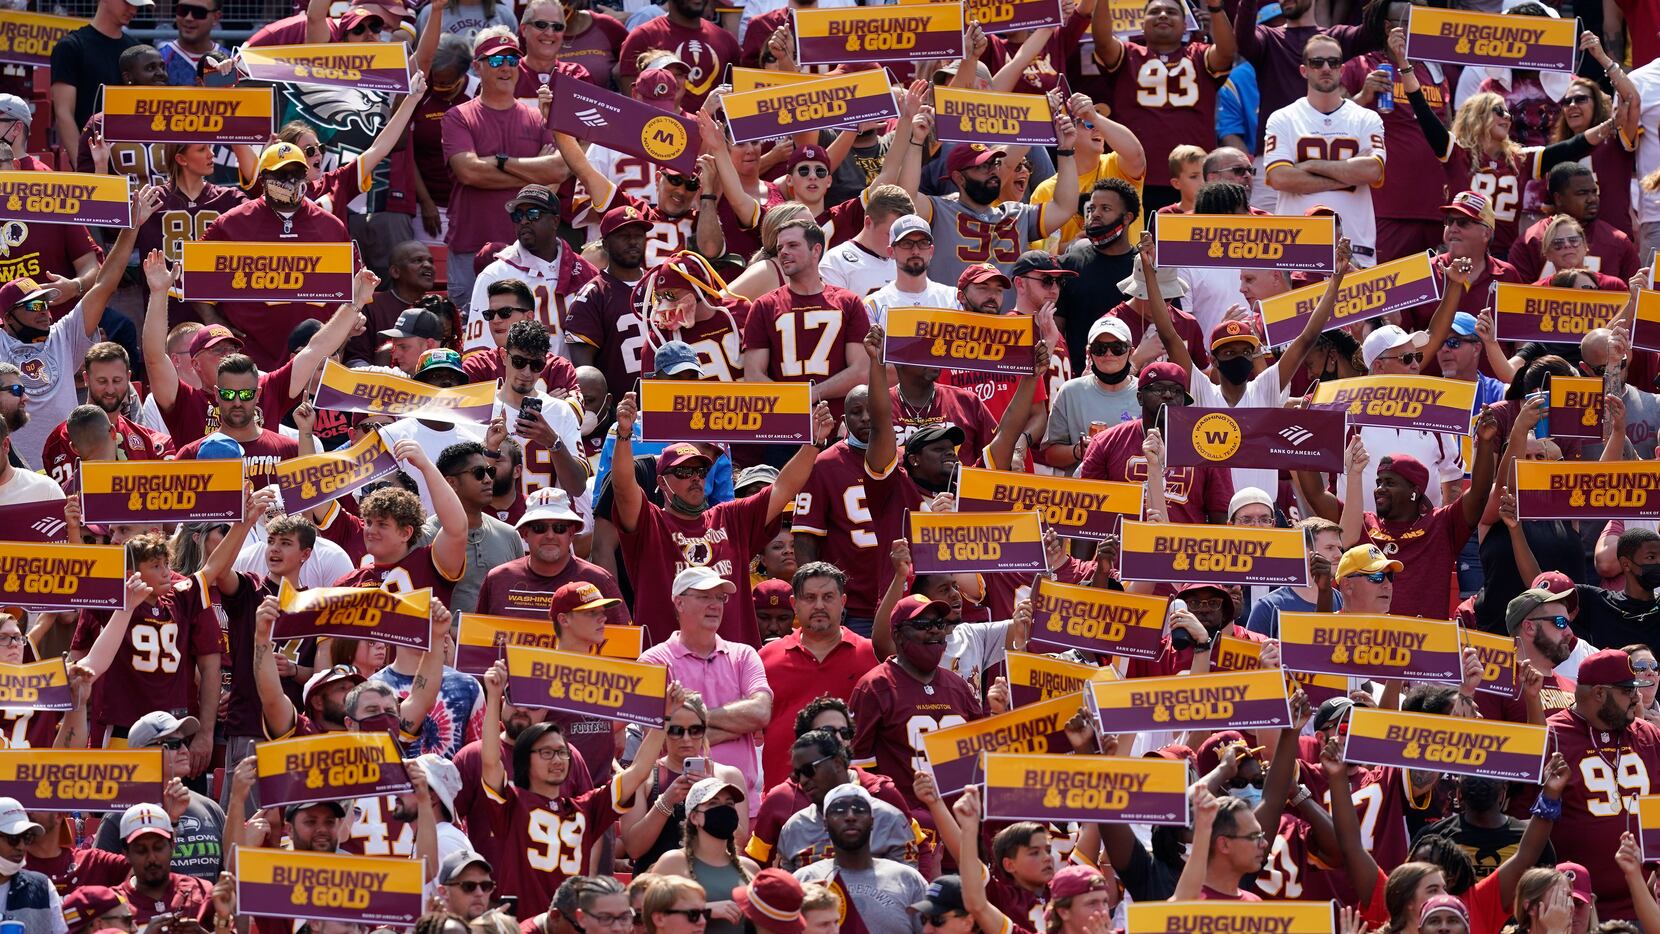 Will Remove Washington Redskins Merchandise Within 48 Hours